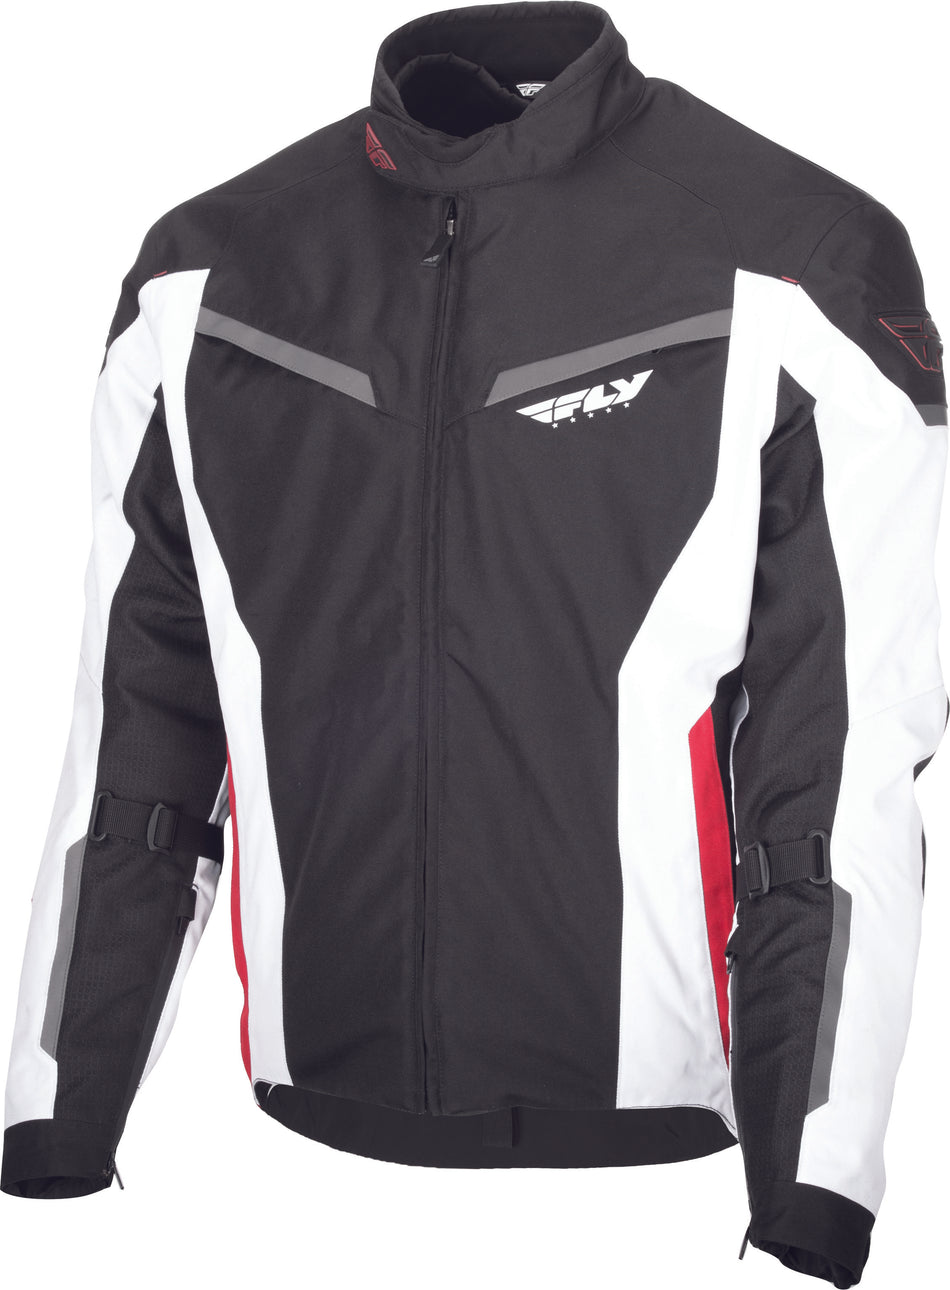 FLY RACING Strata Jacket Black/White/Red Sm 477-2101-2